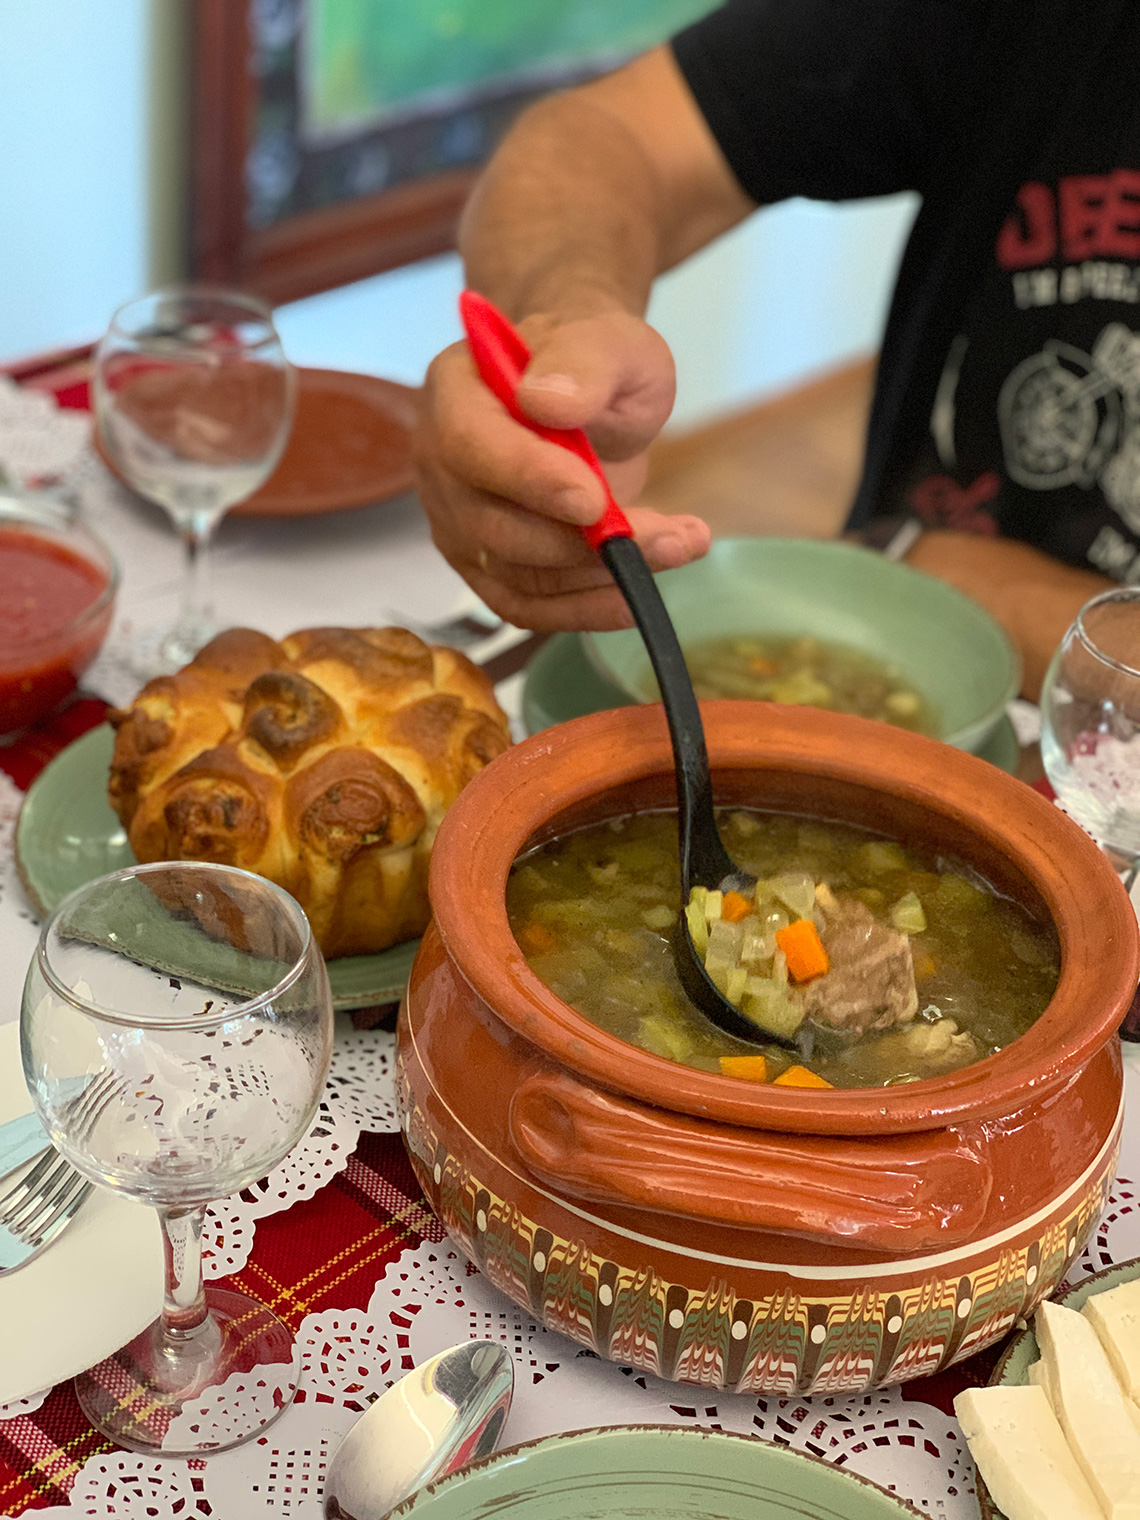 Tasty cuisine. “Balkans Yastia”. Сooking masterclass for adults in Odessa.